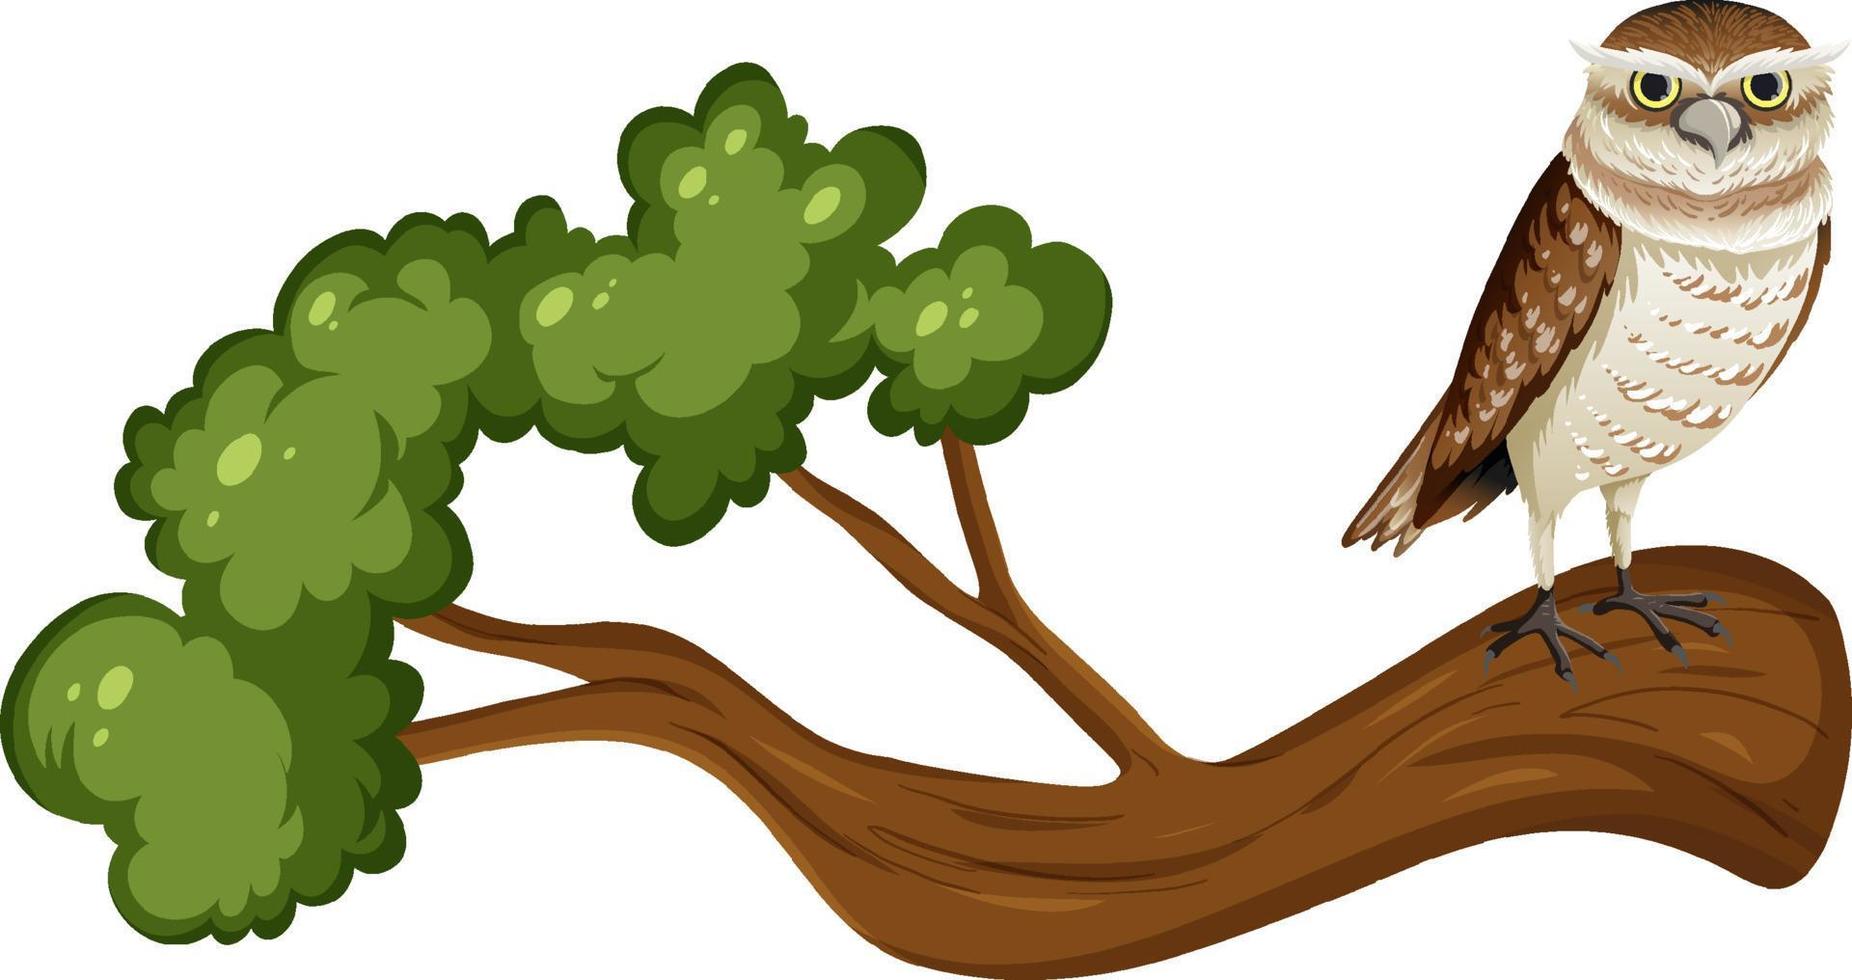 Owl standing on tree branch in cartoon style vector